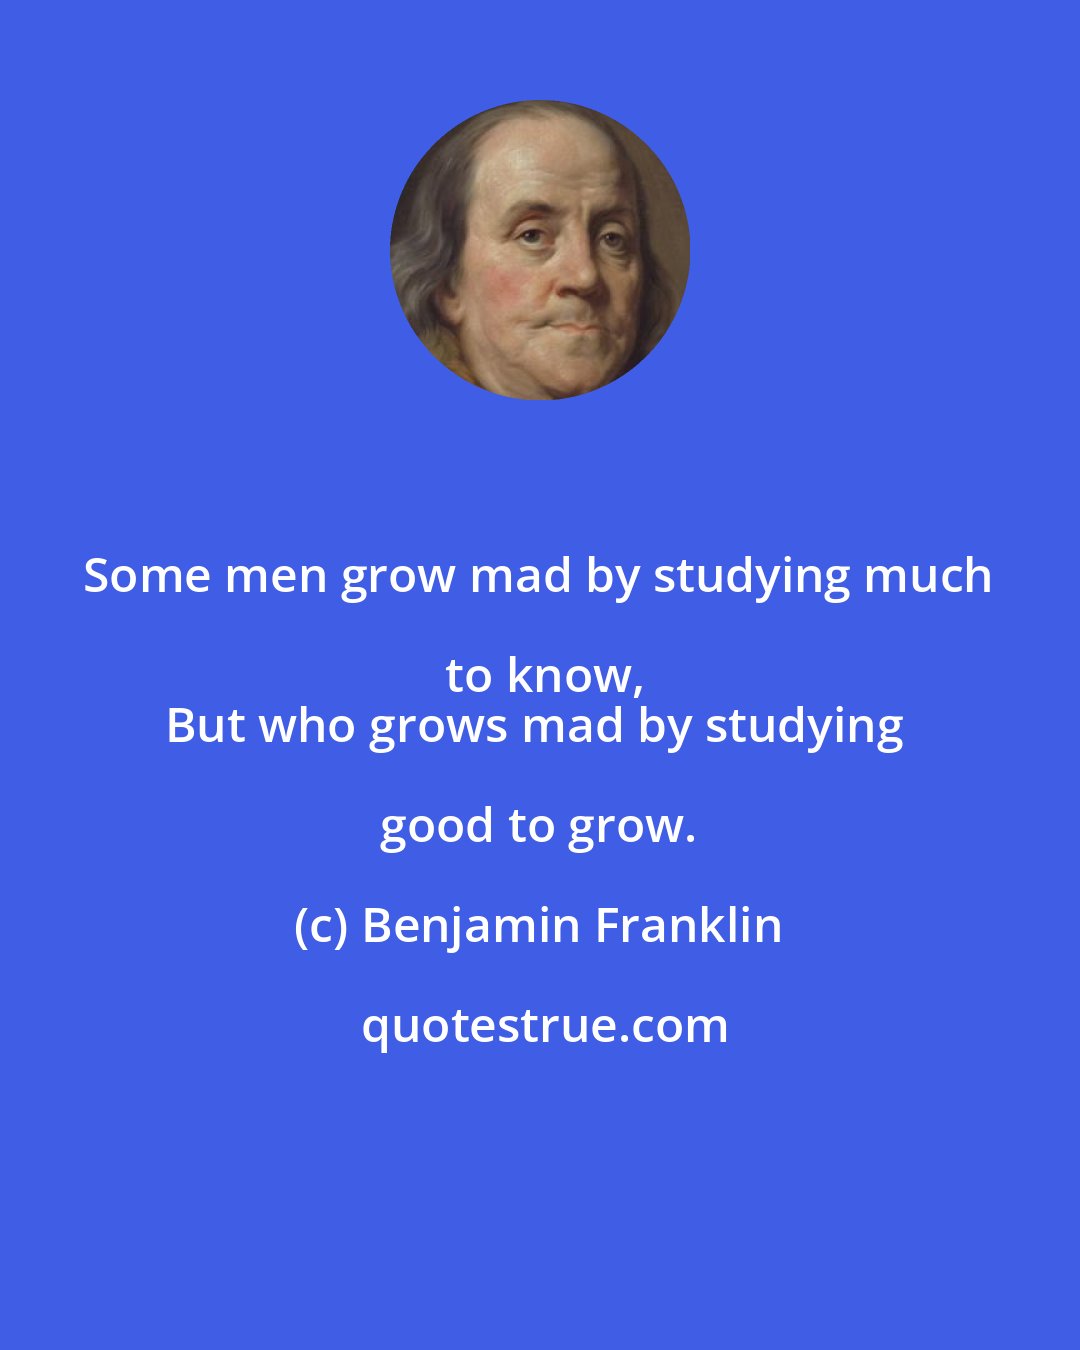 Benjamin Franklin: Some men grow mad by studying much to know,
But who grows mad by studying good to grow.